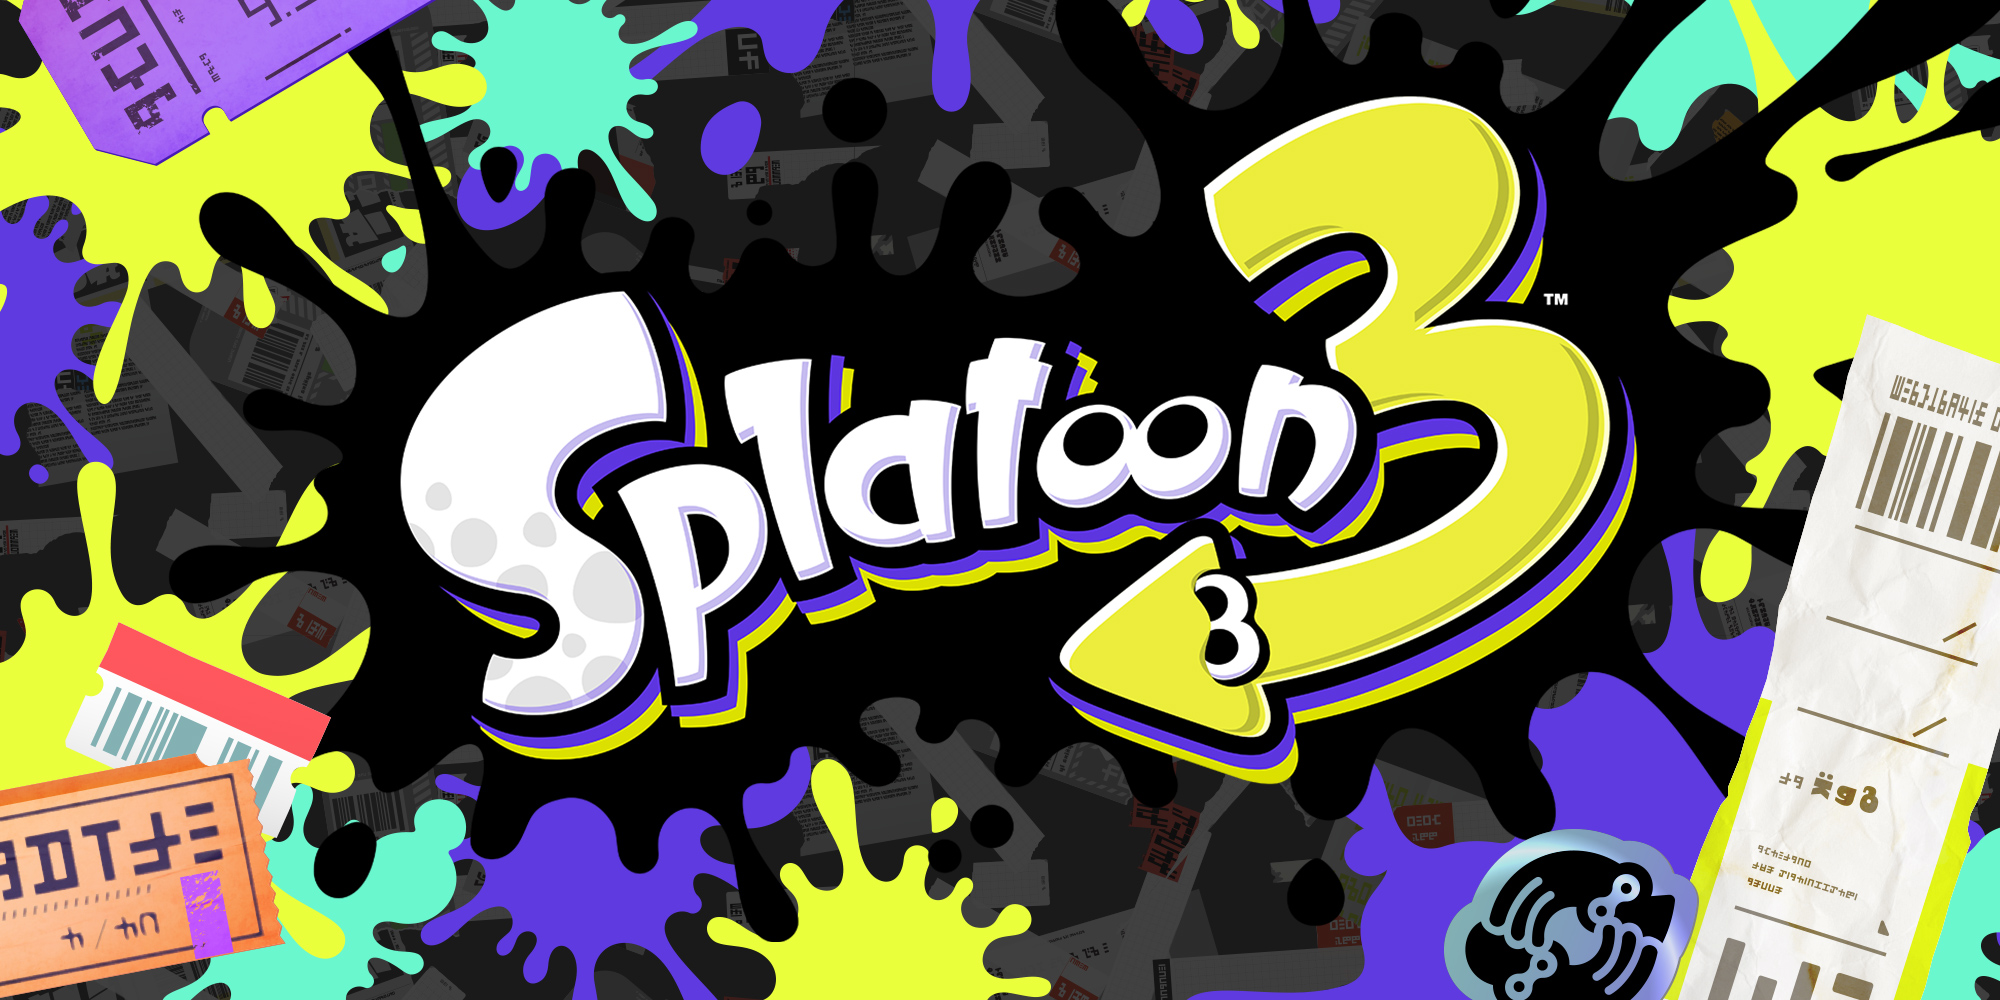 what console will splatoon 3 be on